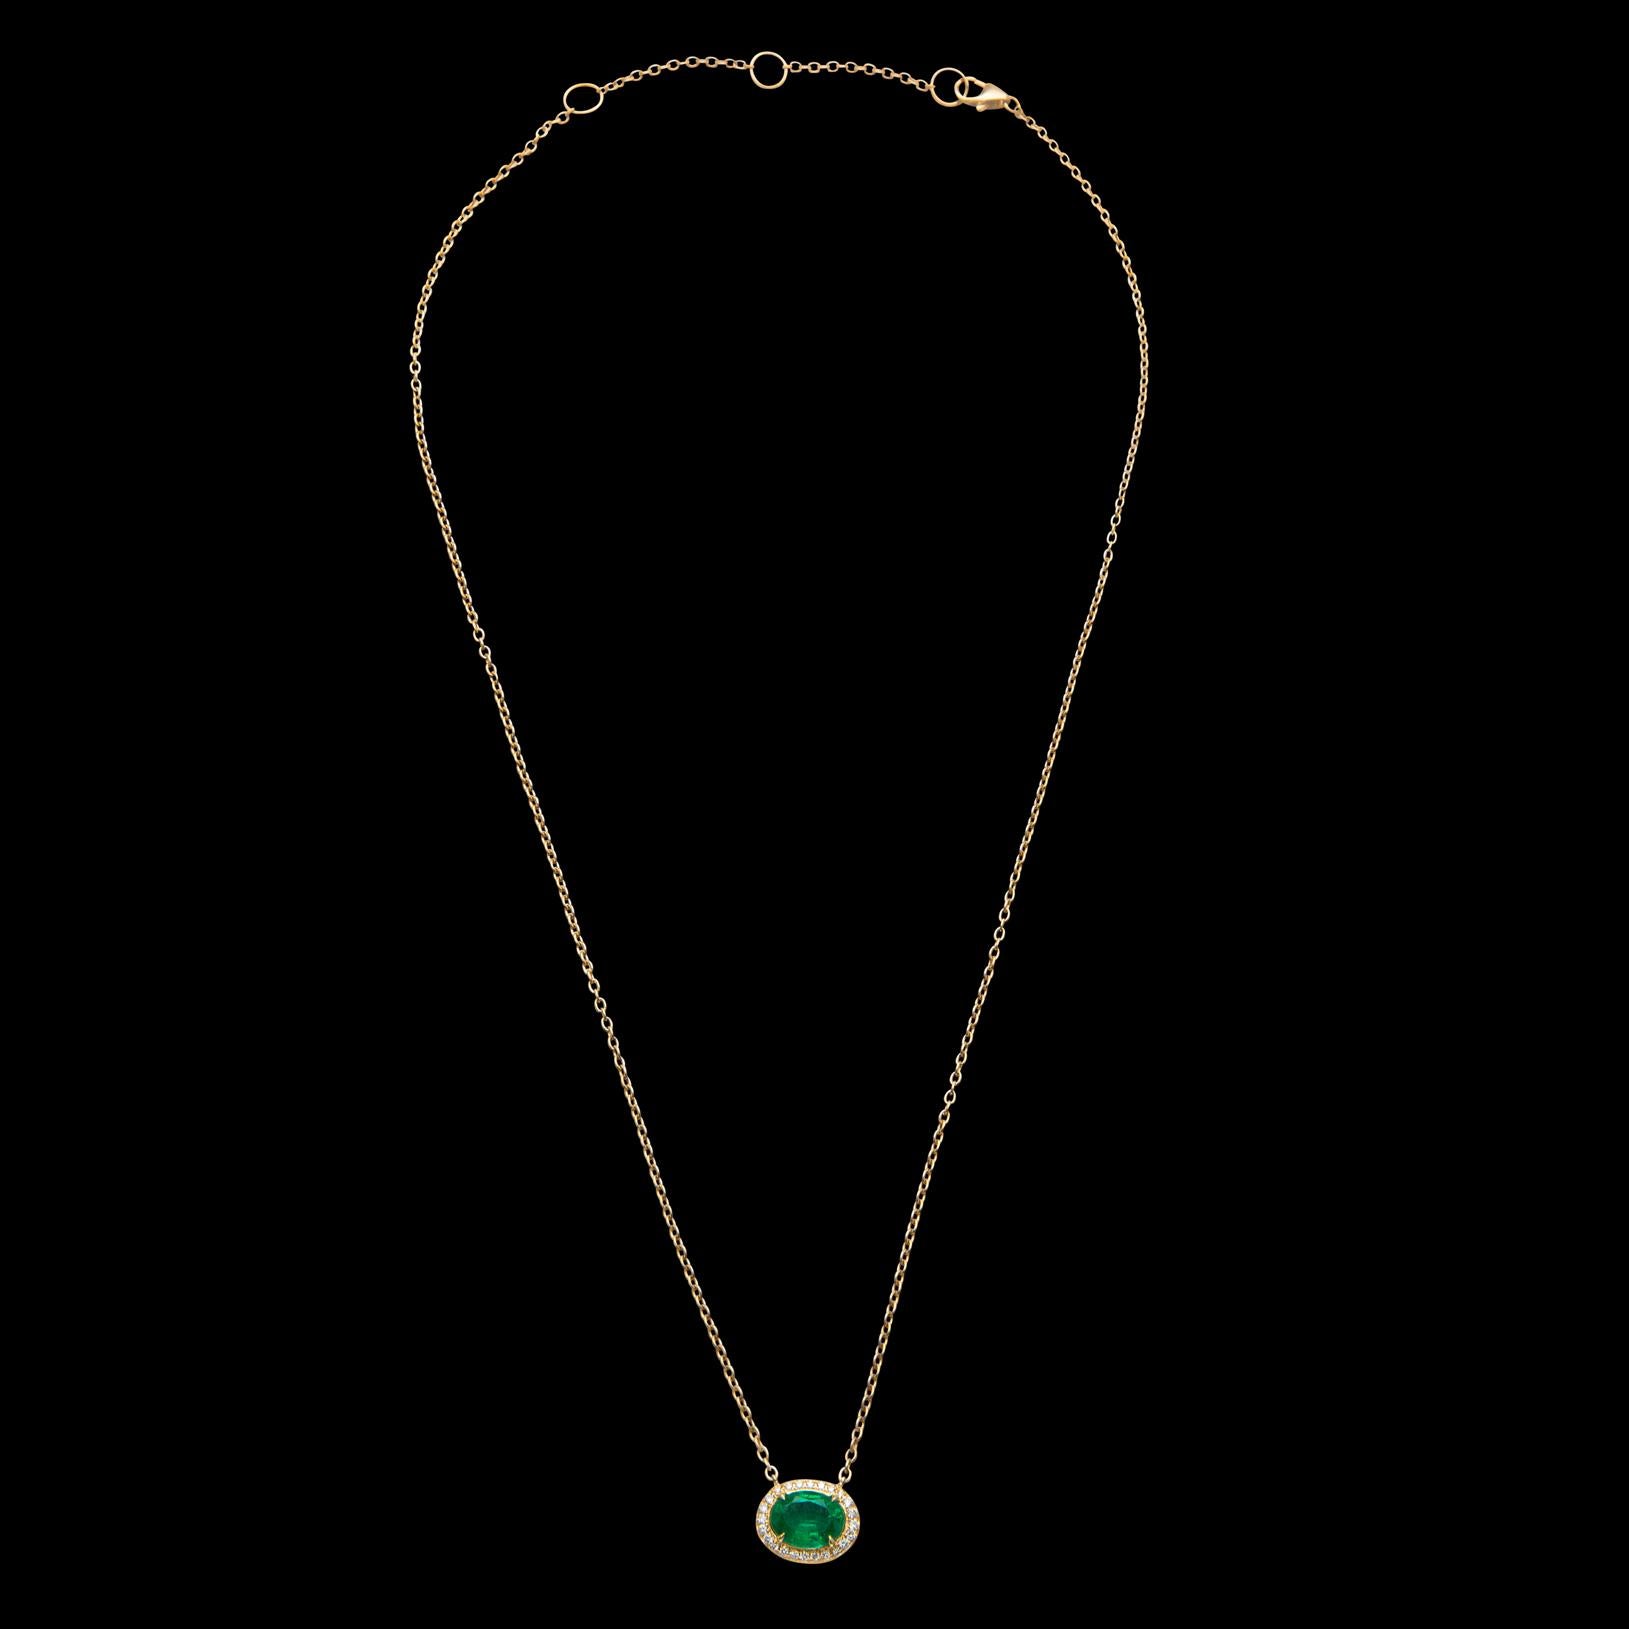 Women's or Men's Emerald and Diamond Necklace by Salavetti